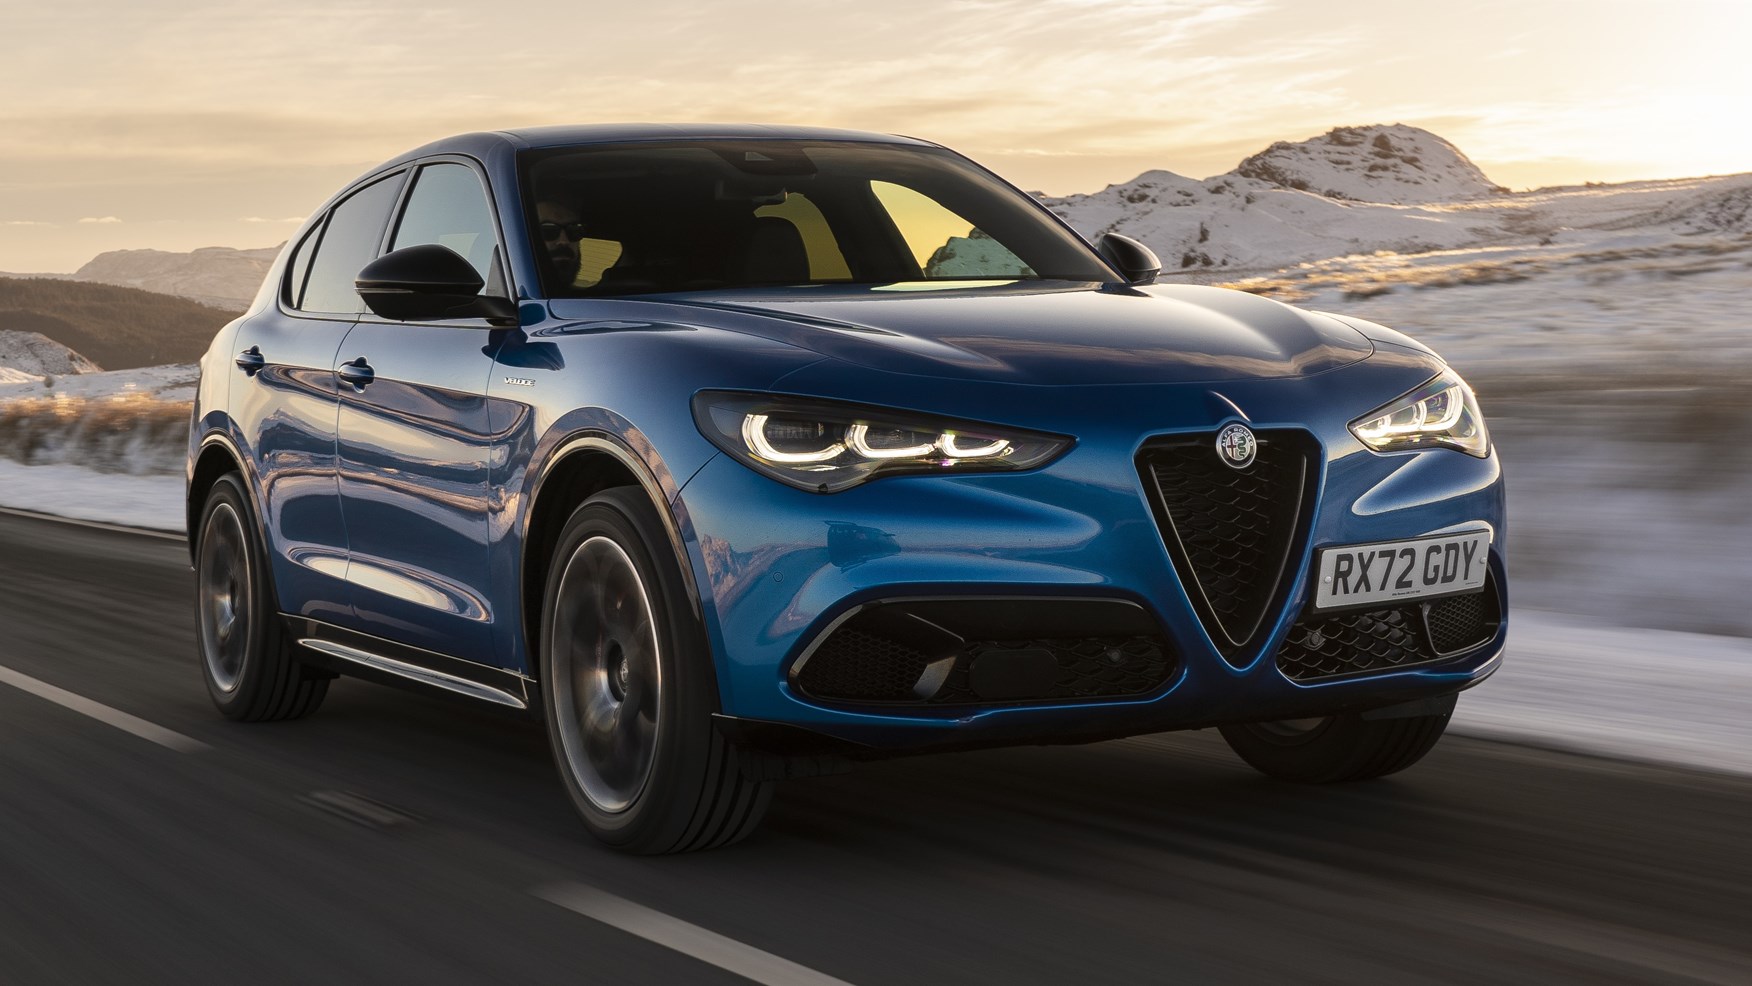 https://car-images.bauersecure.com/wp-images/163704/1752x1168/90-alfaromeostelvio-fronttracking.jpg?mode=max&quality=90&scale=down